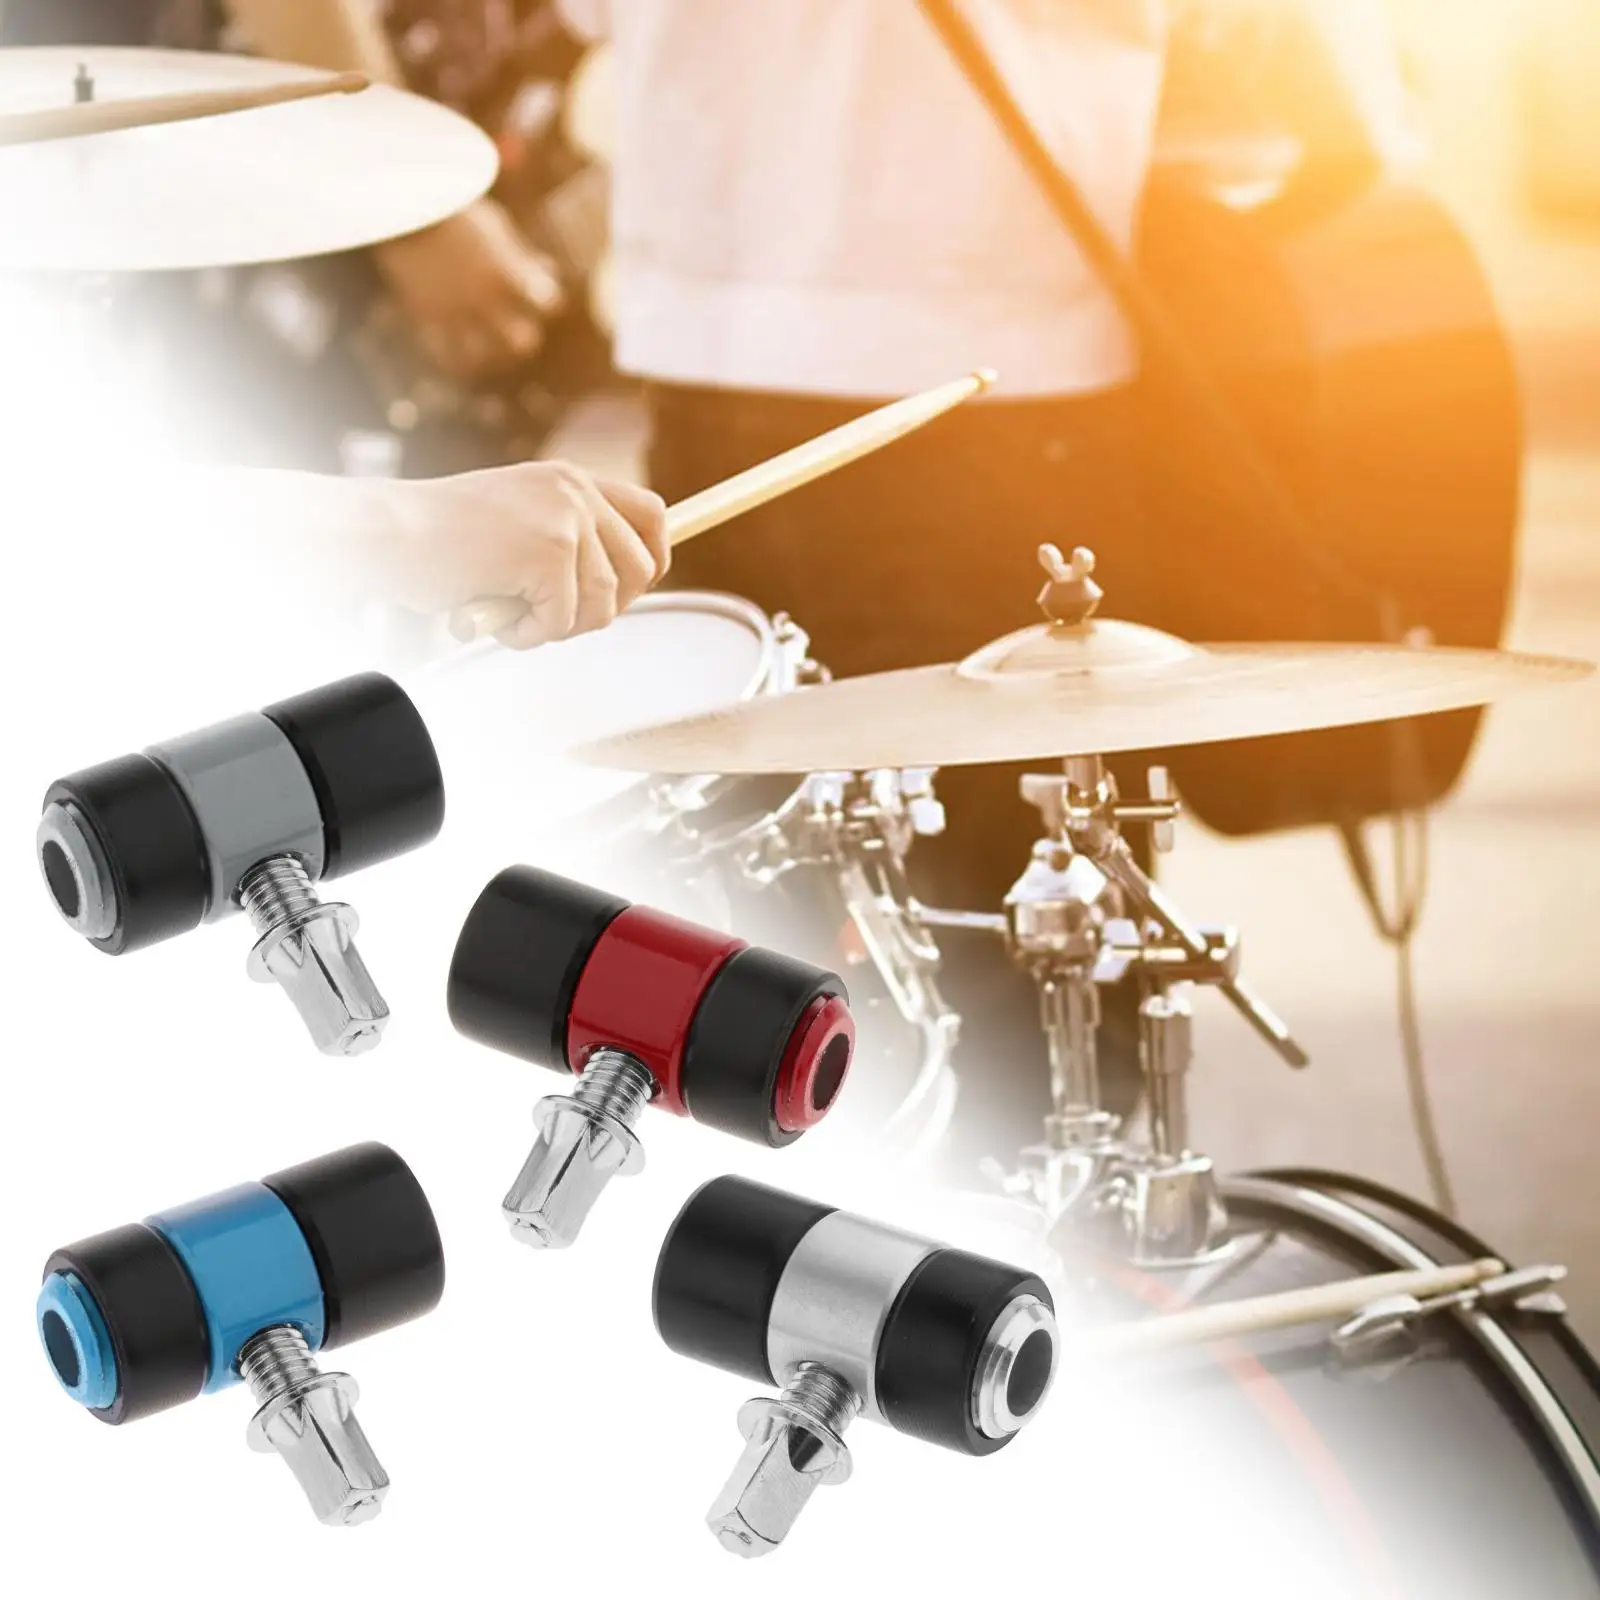 Removable Counterweight Accessory Bearing Durable Refit Replaces Hammer Head for Drum Percussion Instrument Refit Pedal Drummer